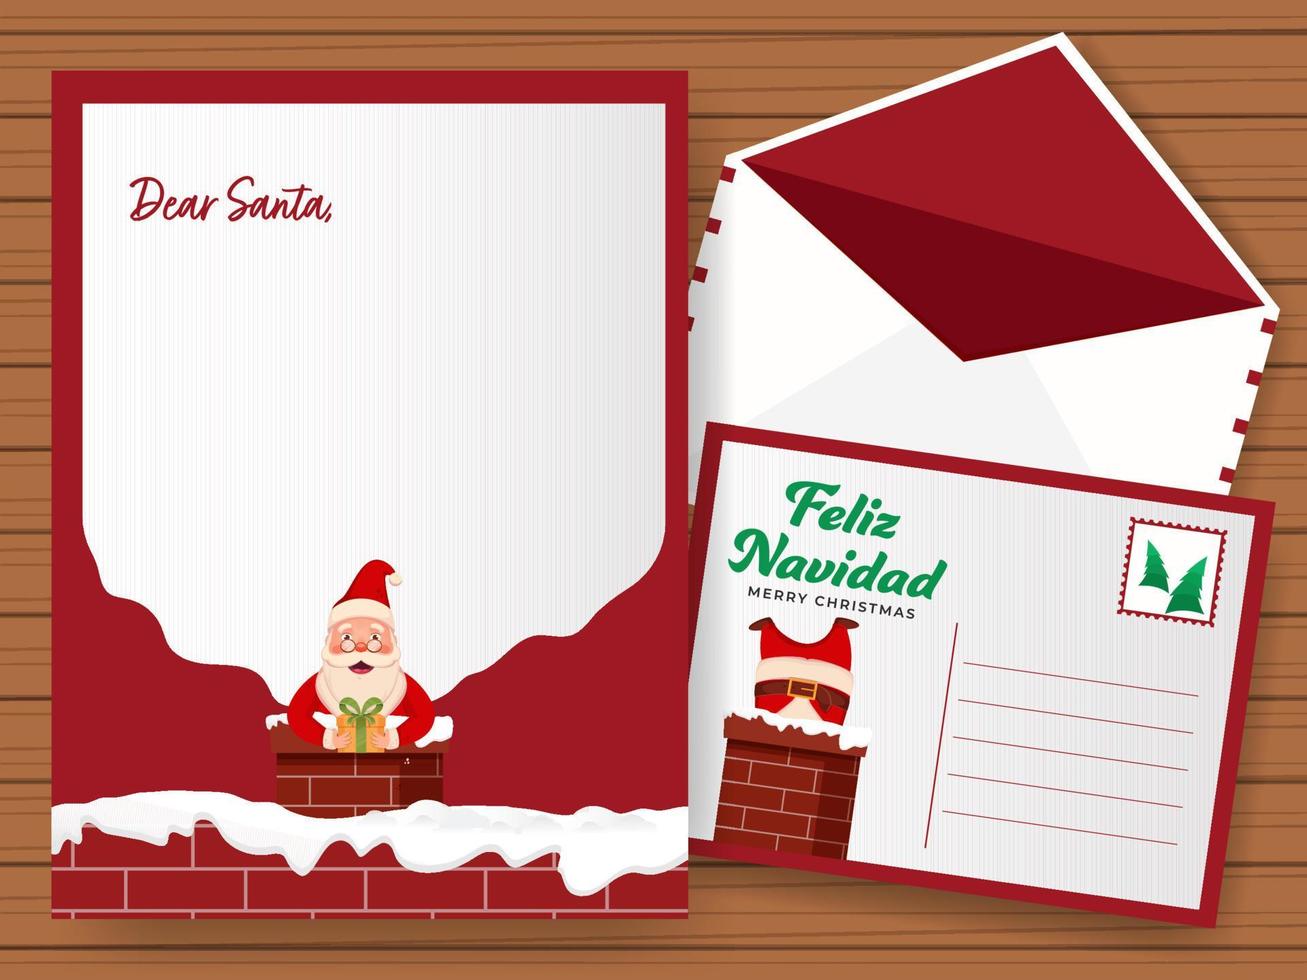 Dear Santa Letter Or Wishing Card With Double-Sides Envelope In Red And White Color. vector